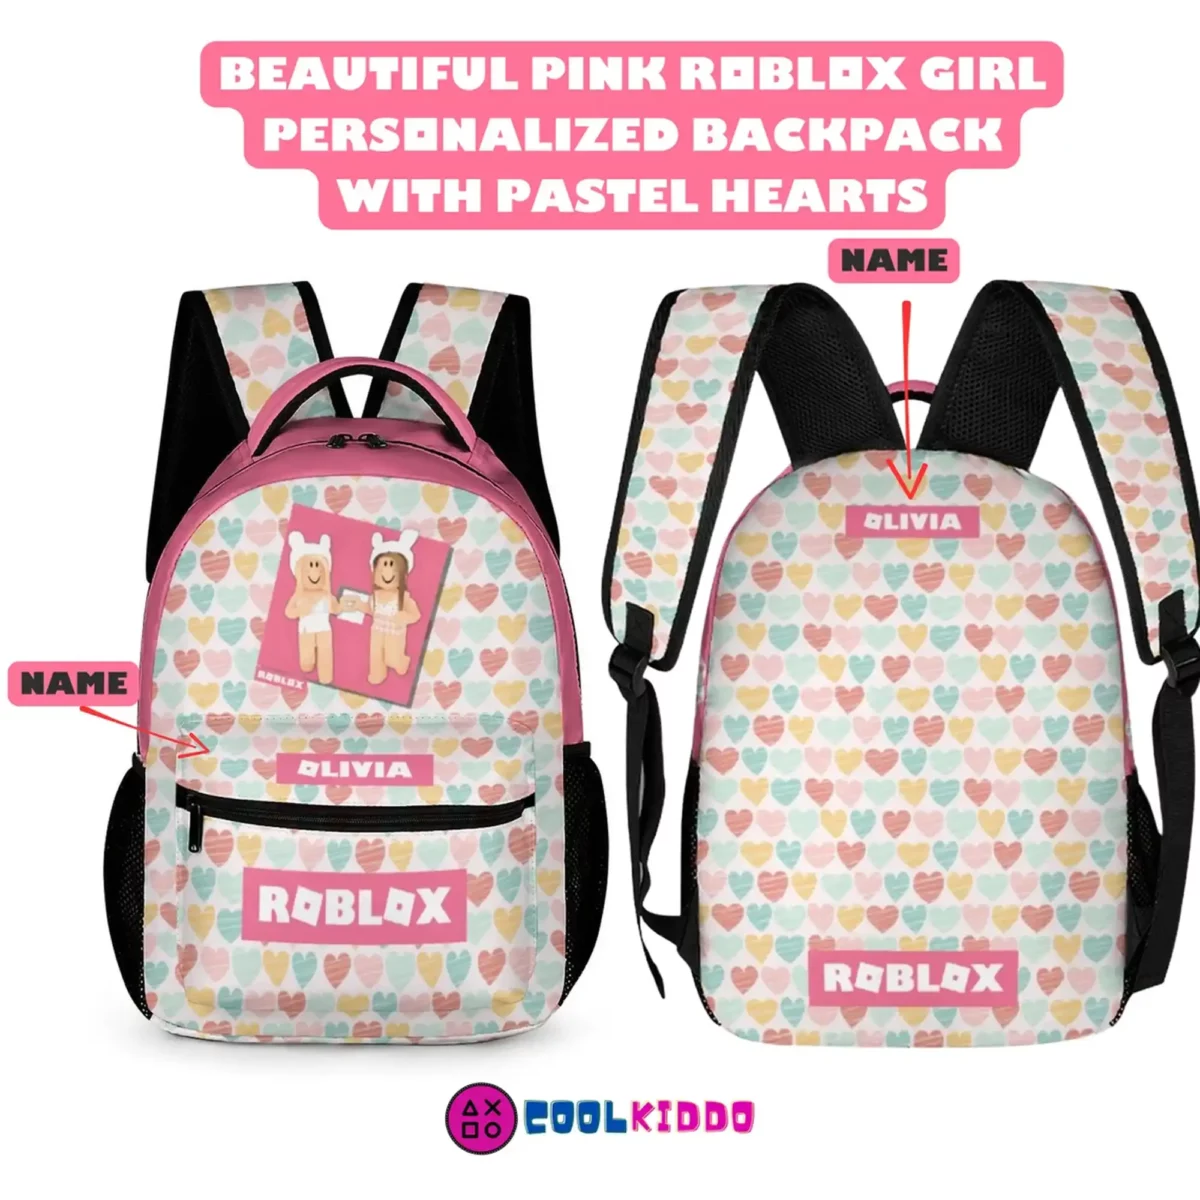 Personalized Roblox Girl’s Backpack with Pastel Hearts Background Cool Kiddo 10